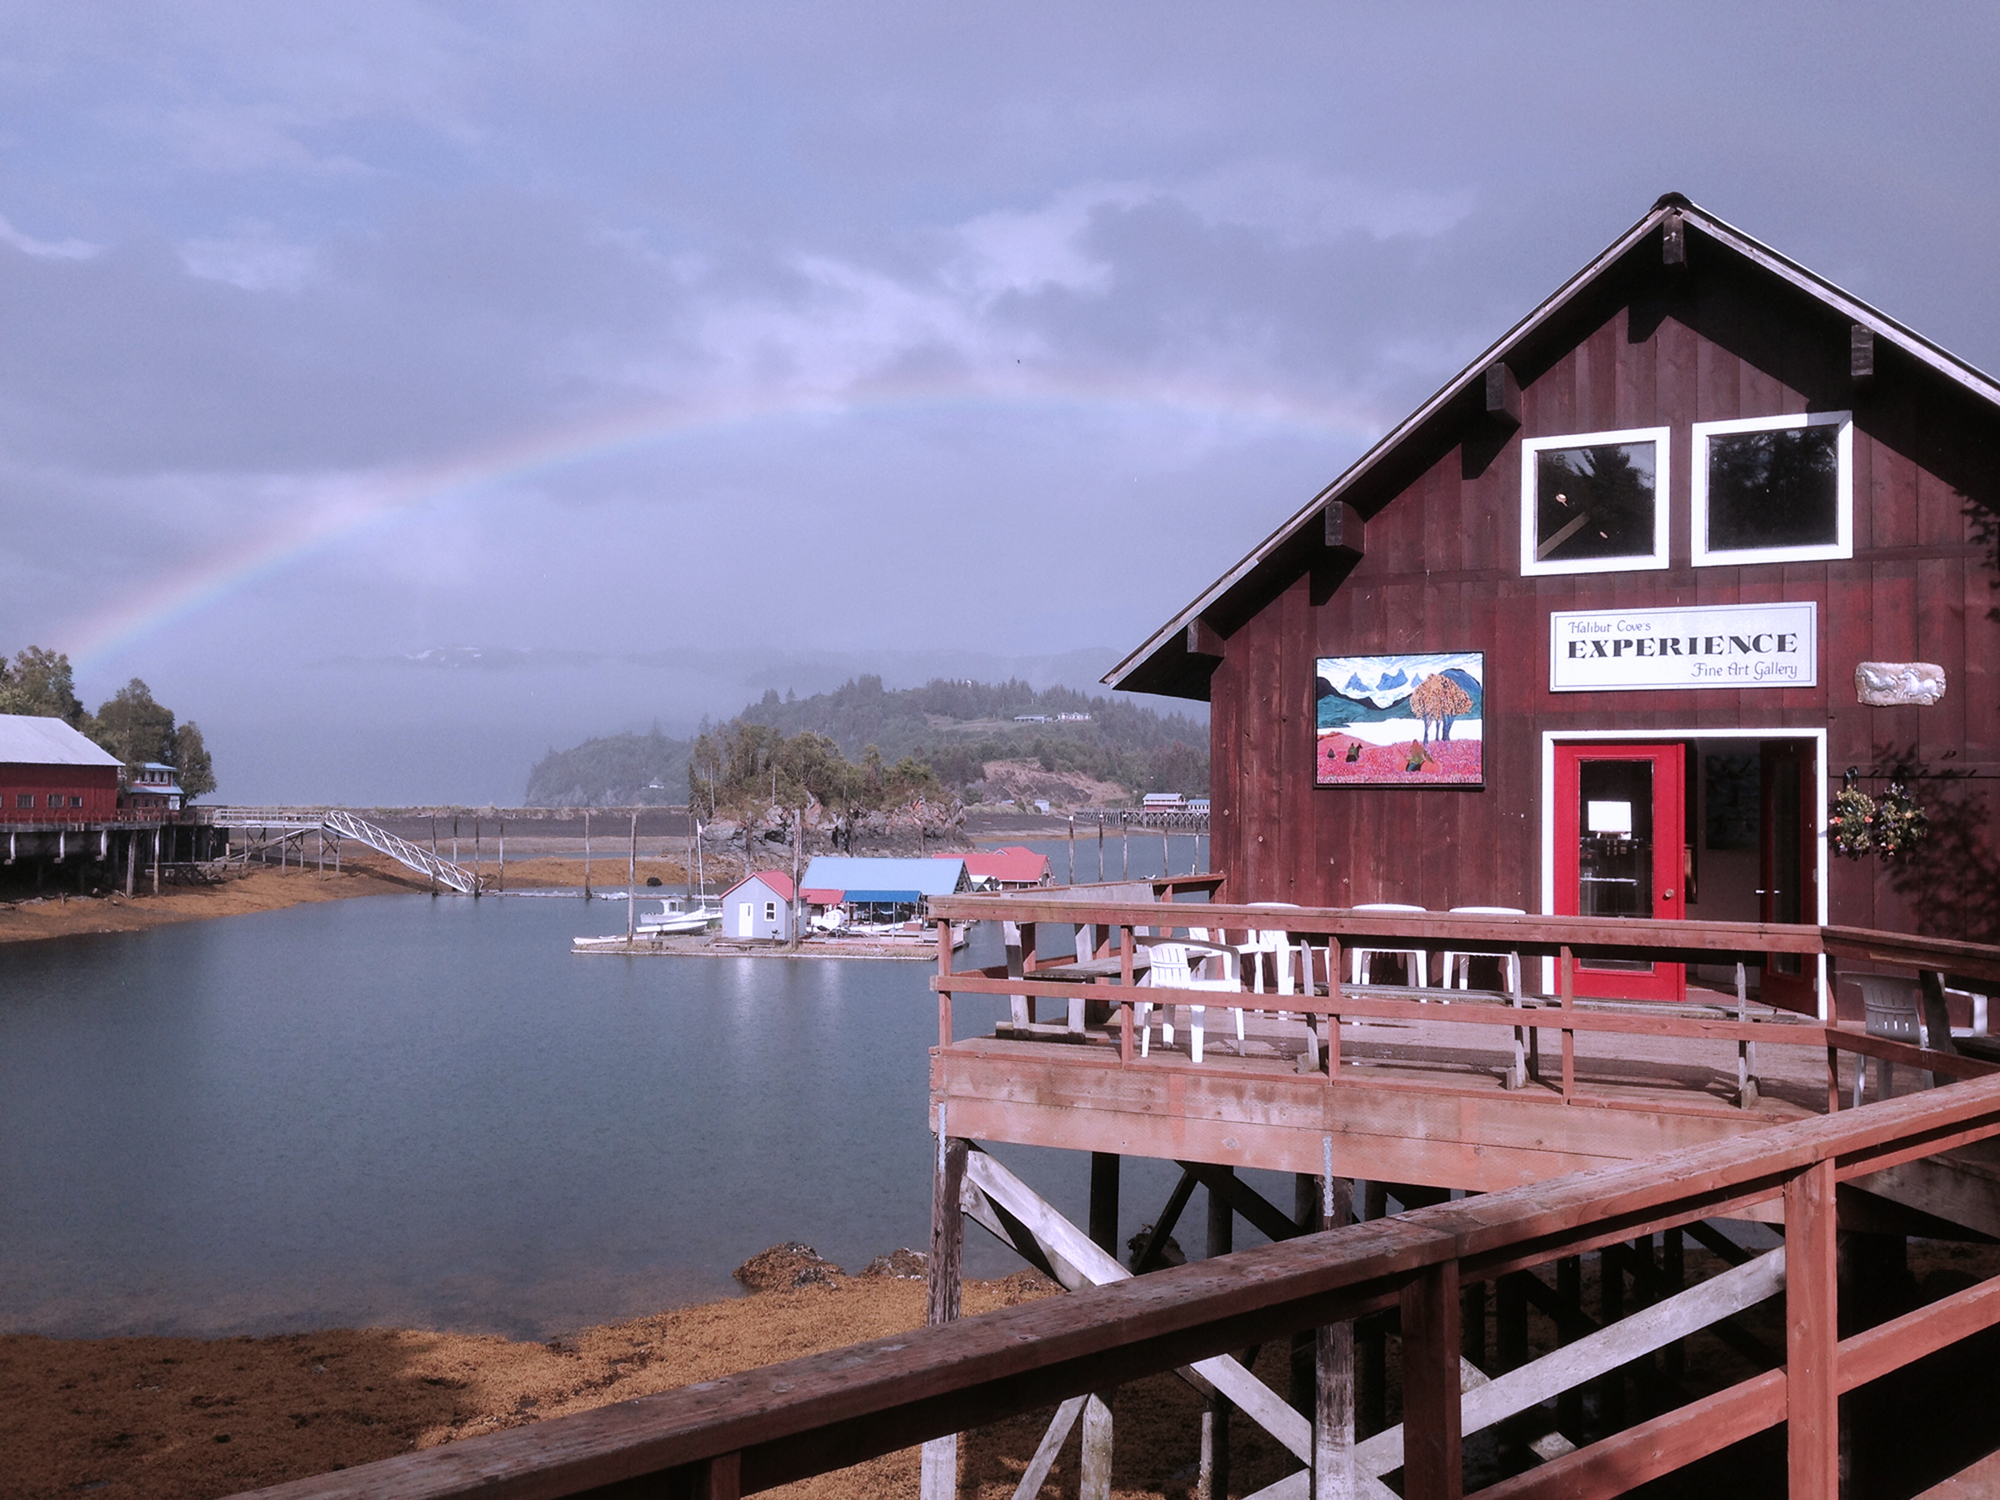 Halibut Cove Experience Gallery exterior.jpg